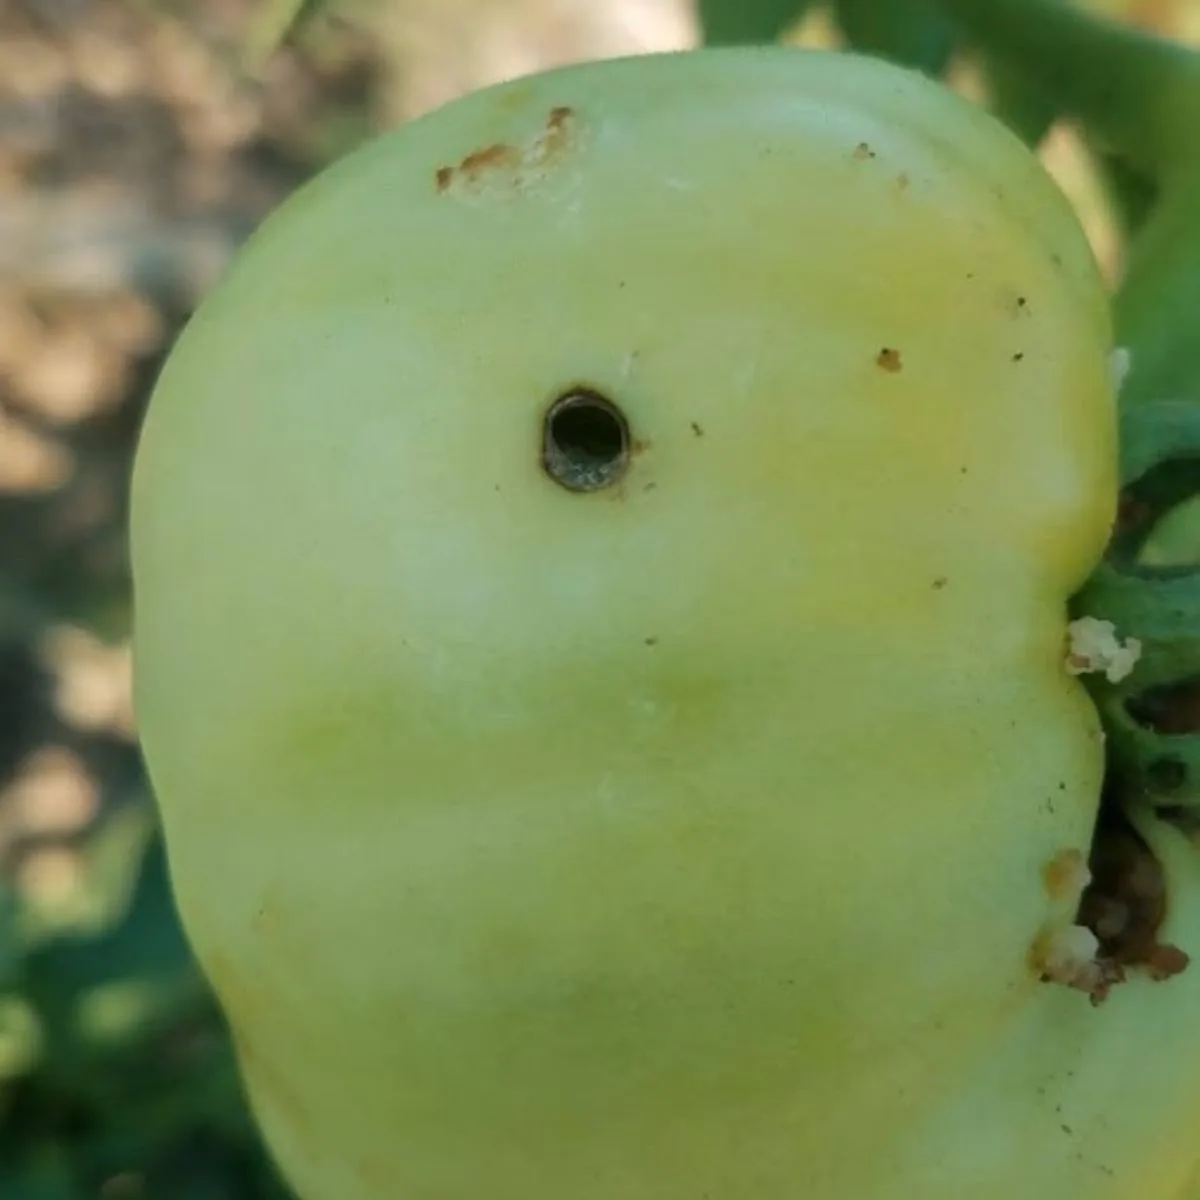 A green tomato with a hole made by a tomato fruitworm.